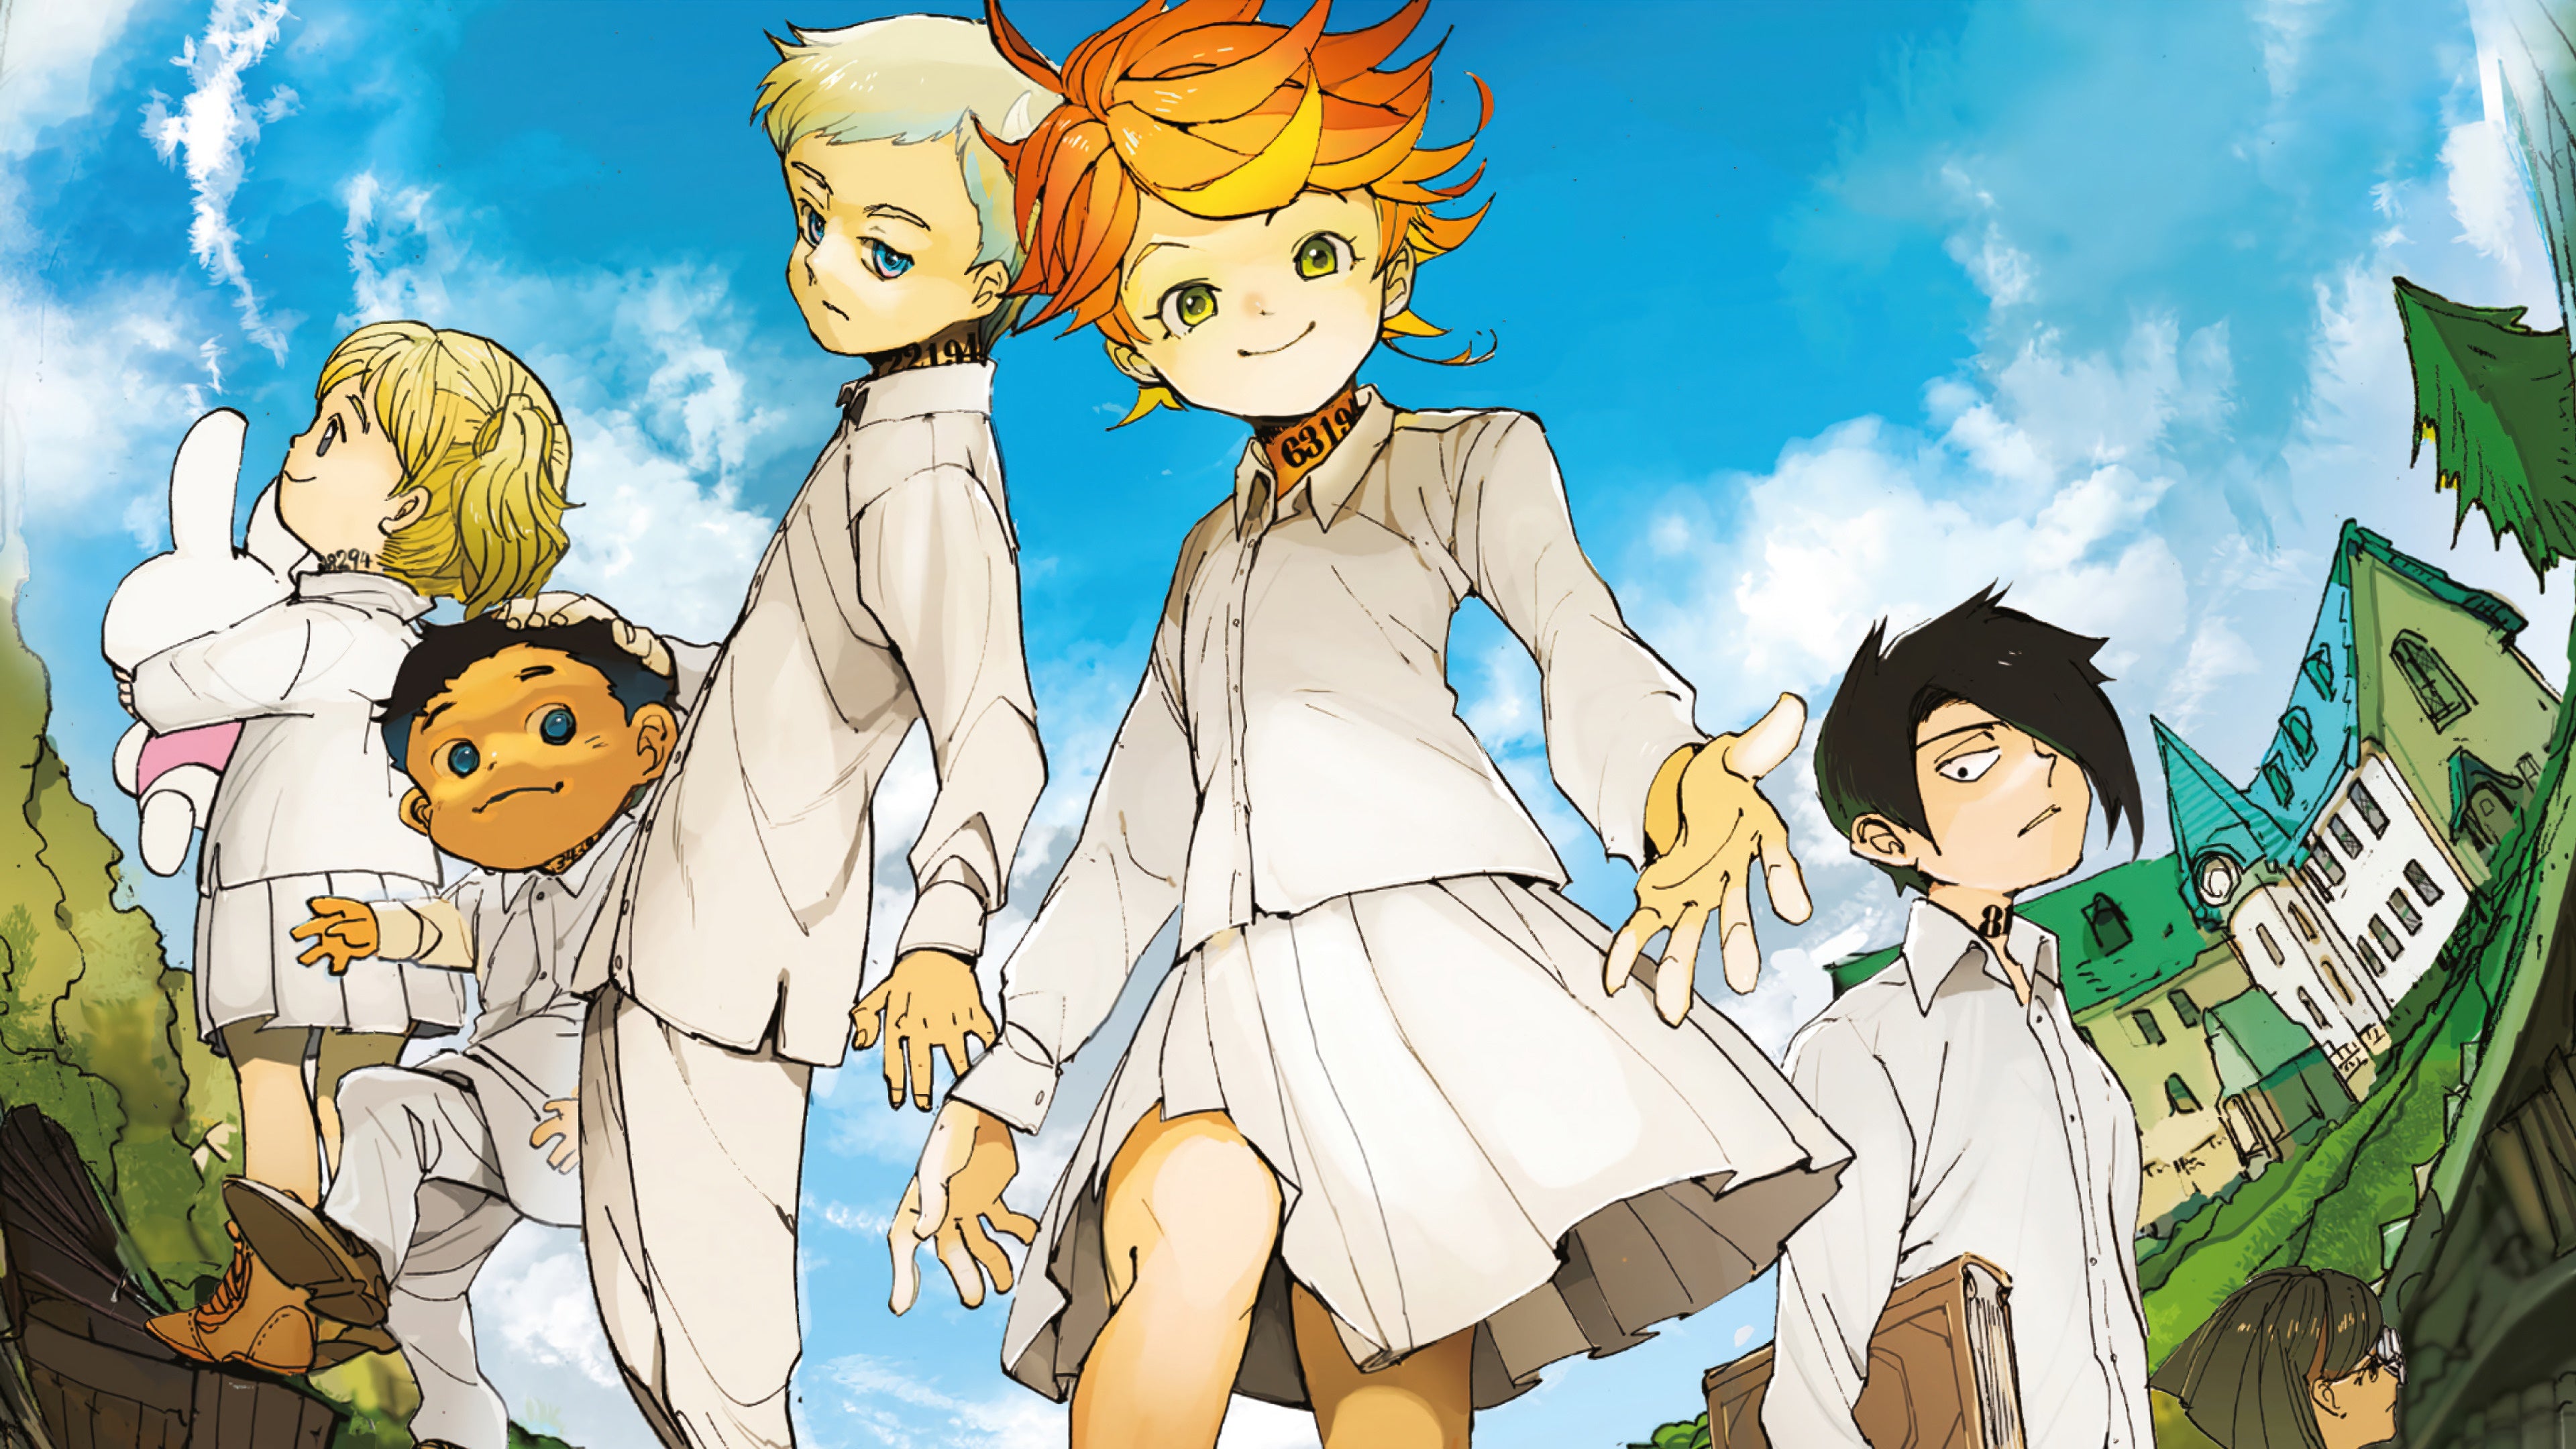 The Promised Neverland on X: The Promised Neverland S2 anime